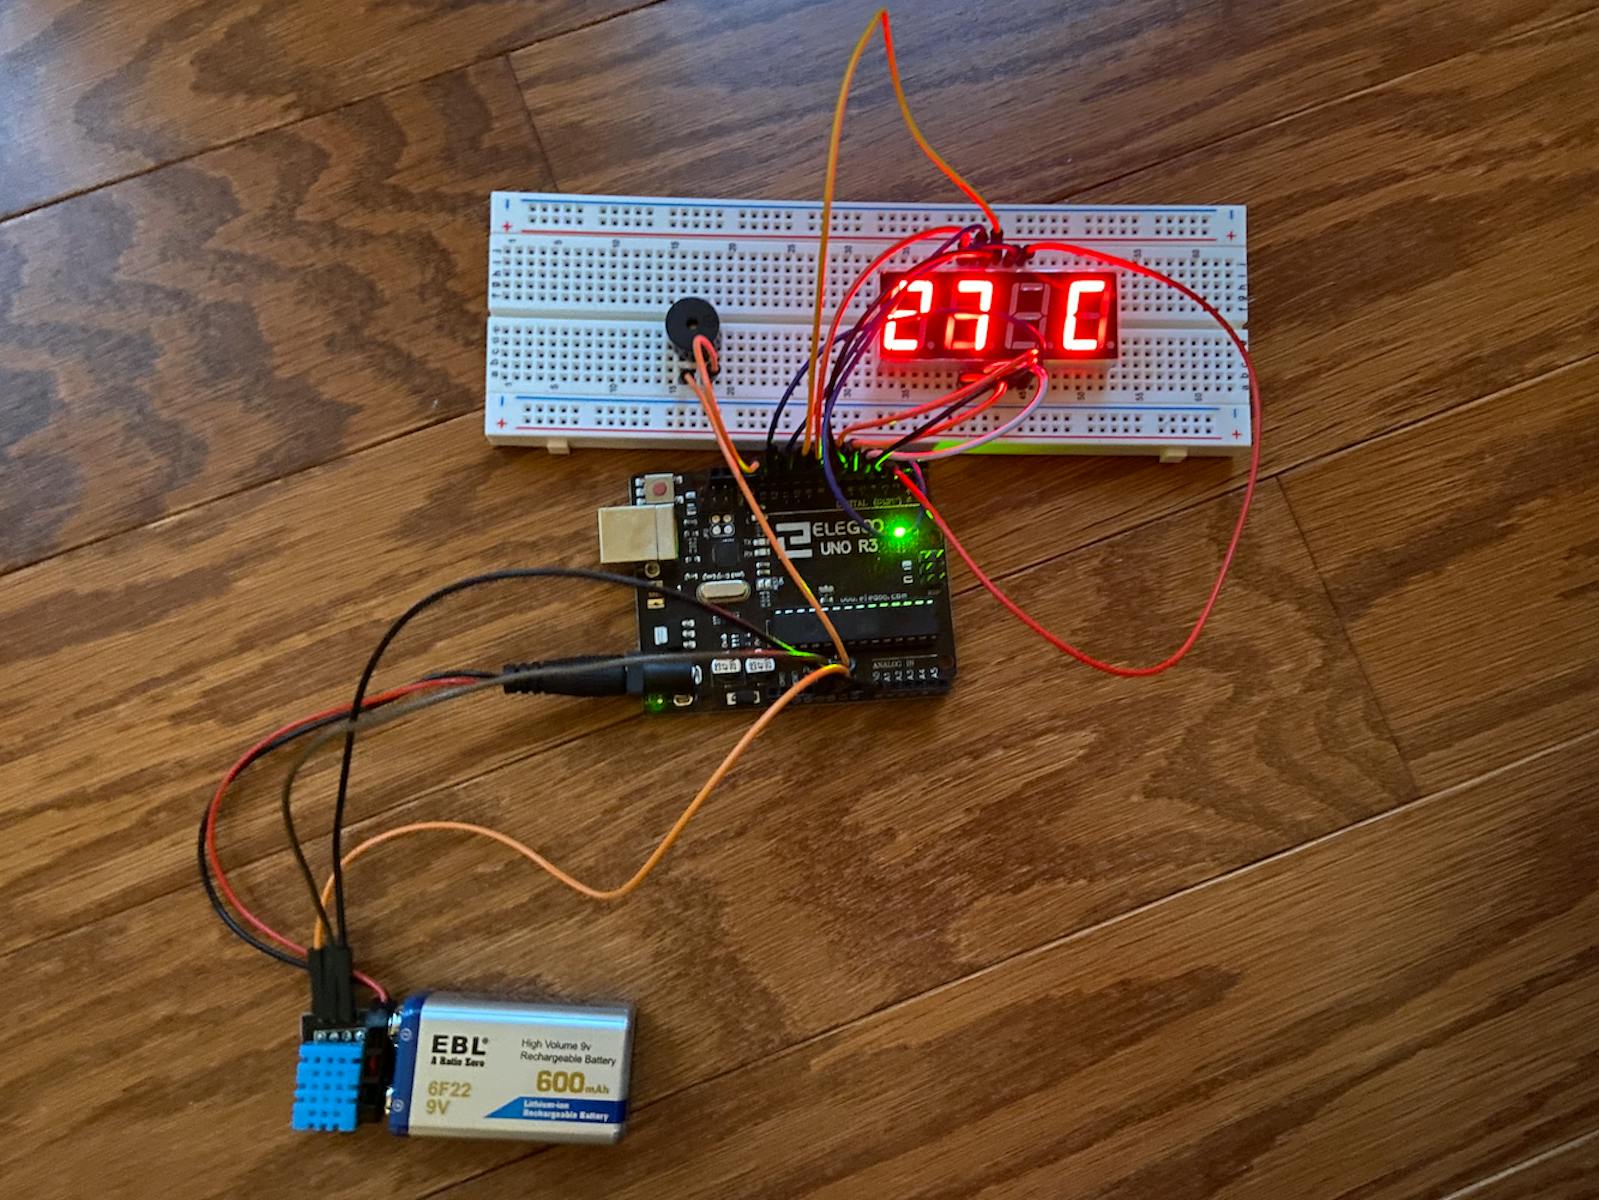 Monitor Room Temperature Remotely with Arduino & MQTT 